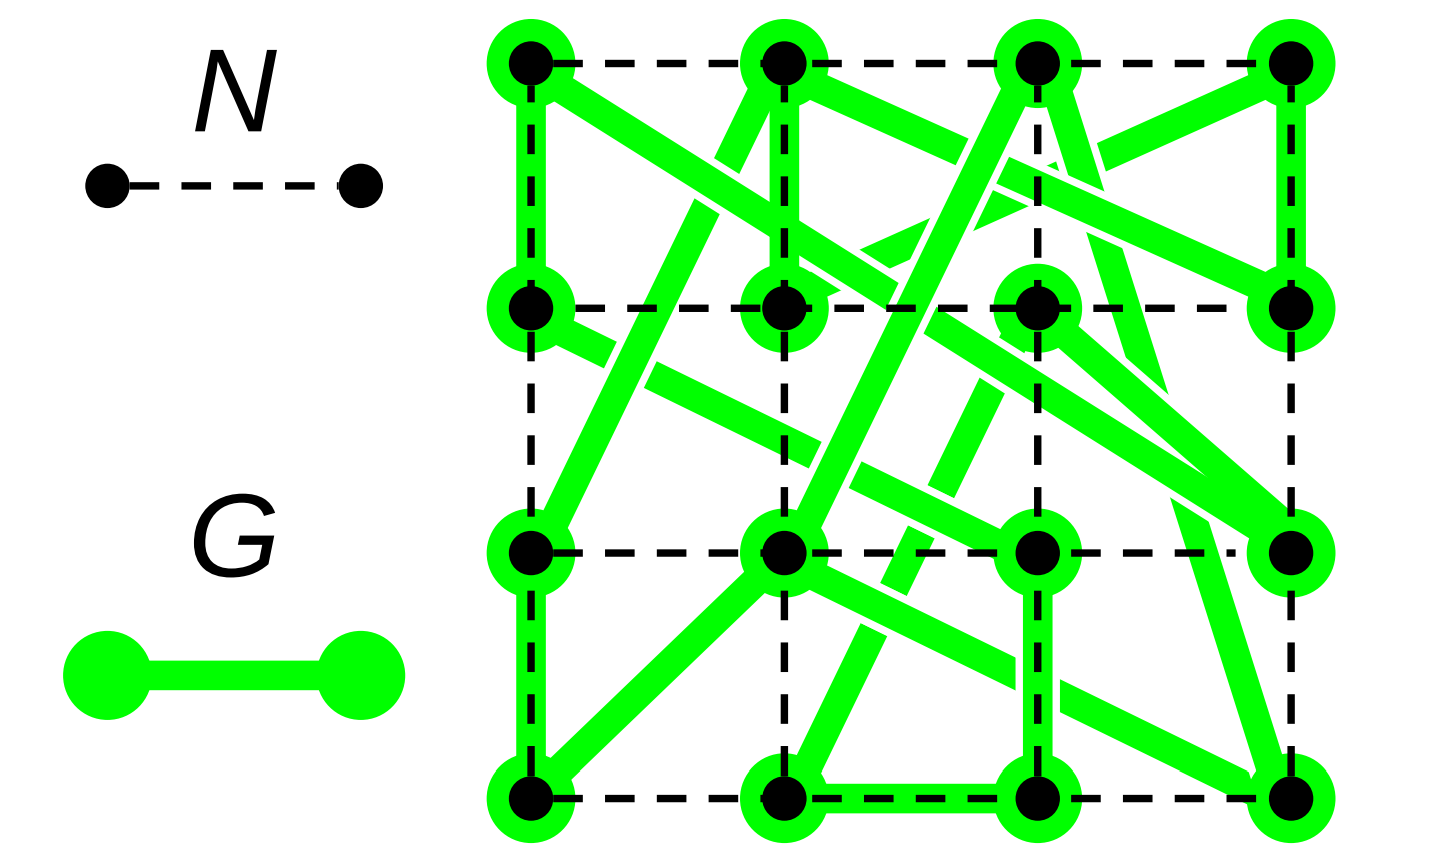 Relationship between a computational mesh N and a small-world interaction network G constructed over N